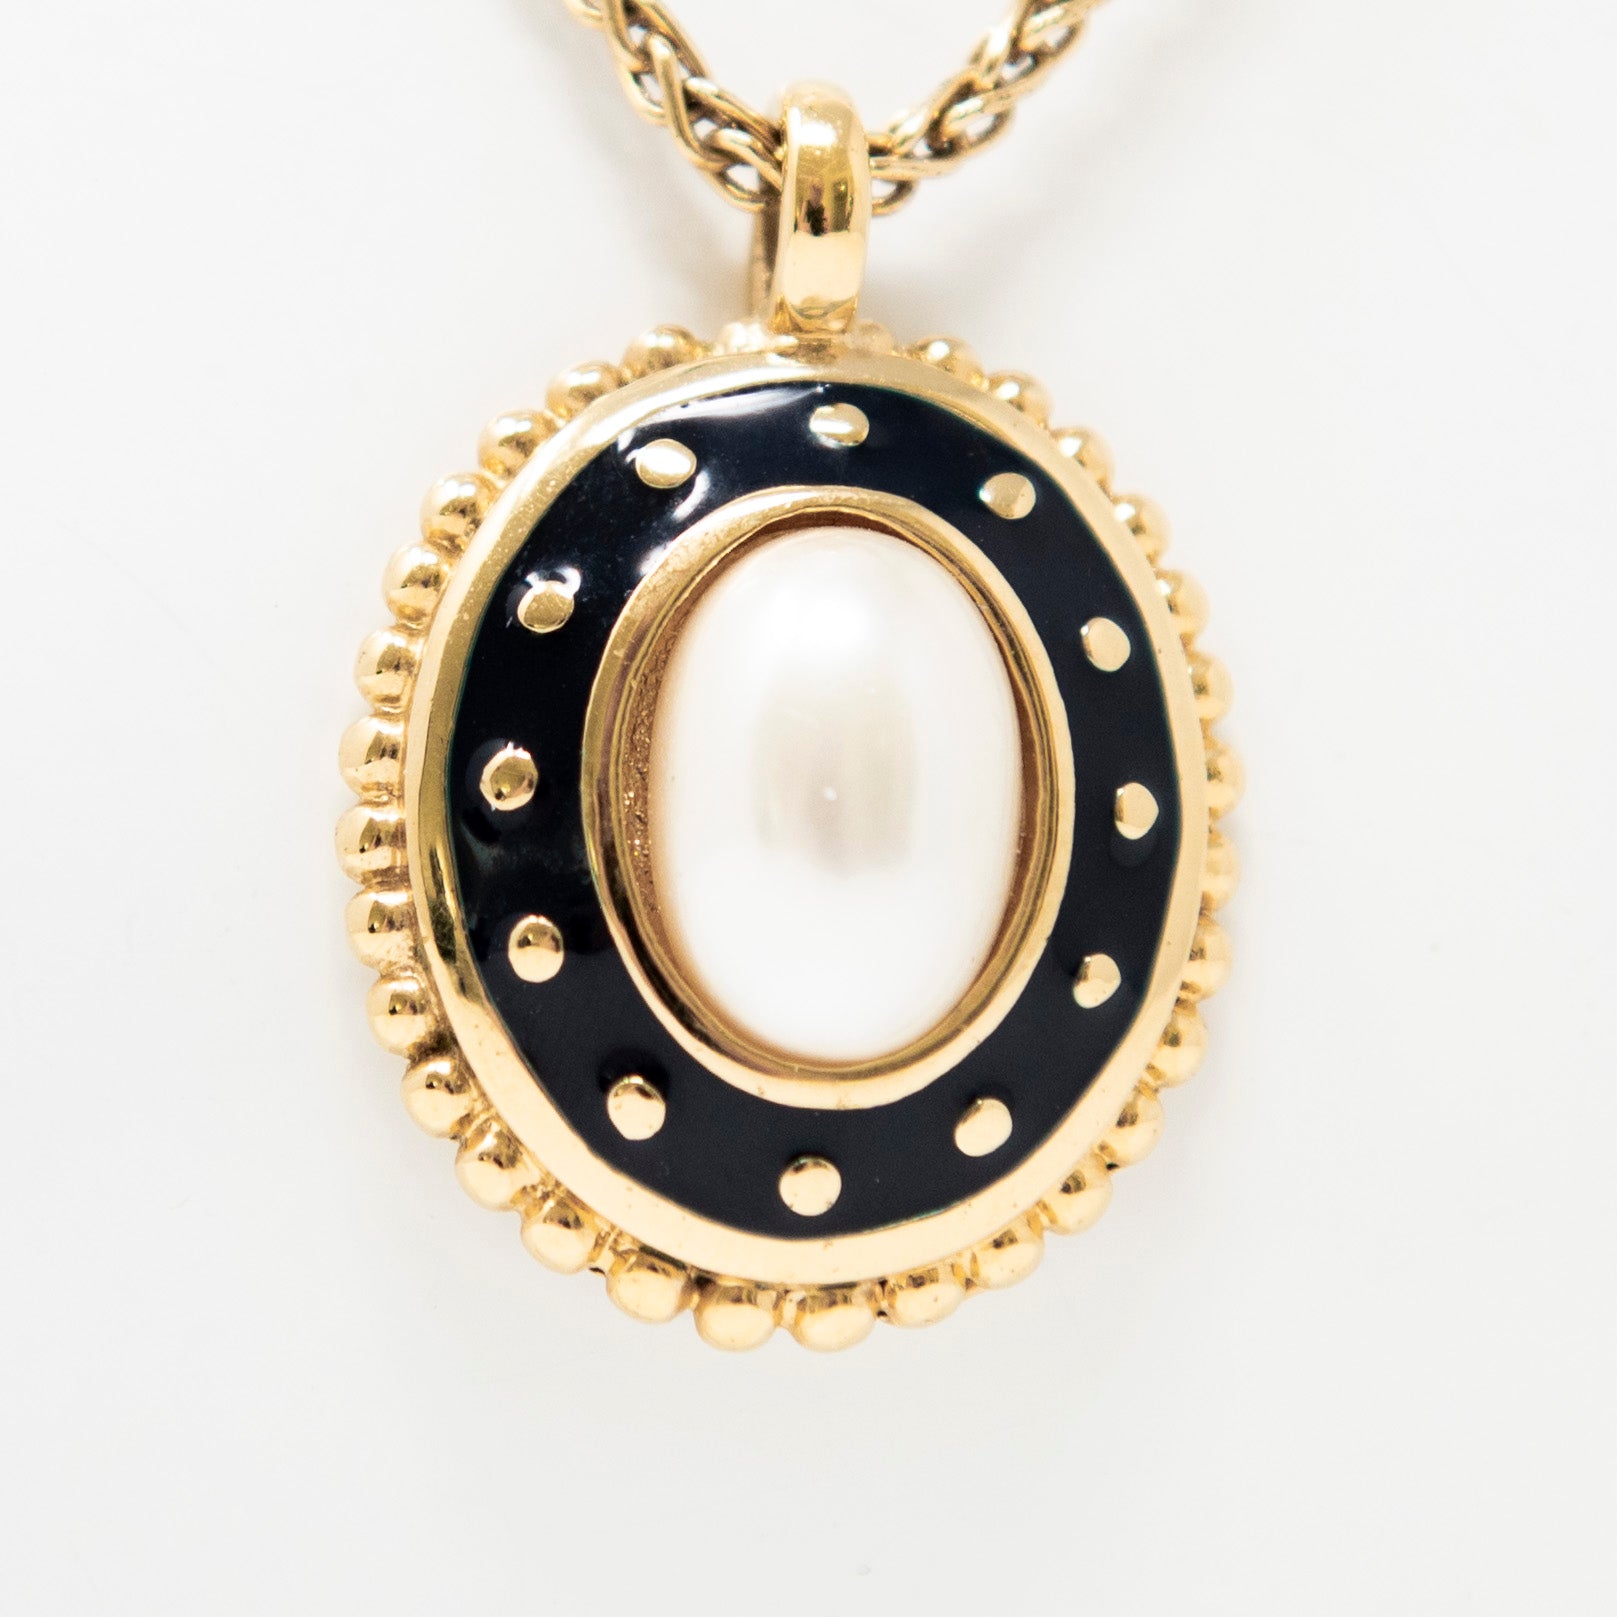 Burberry Pearl Vintage Oval Pendant Necklace